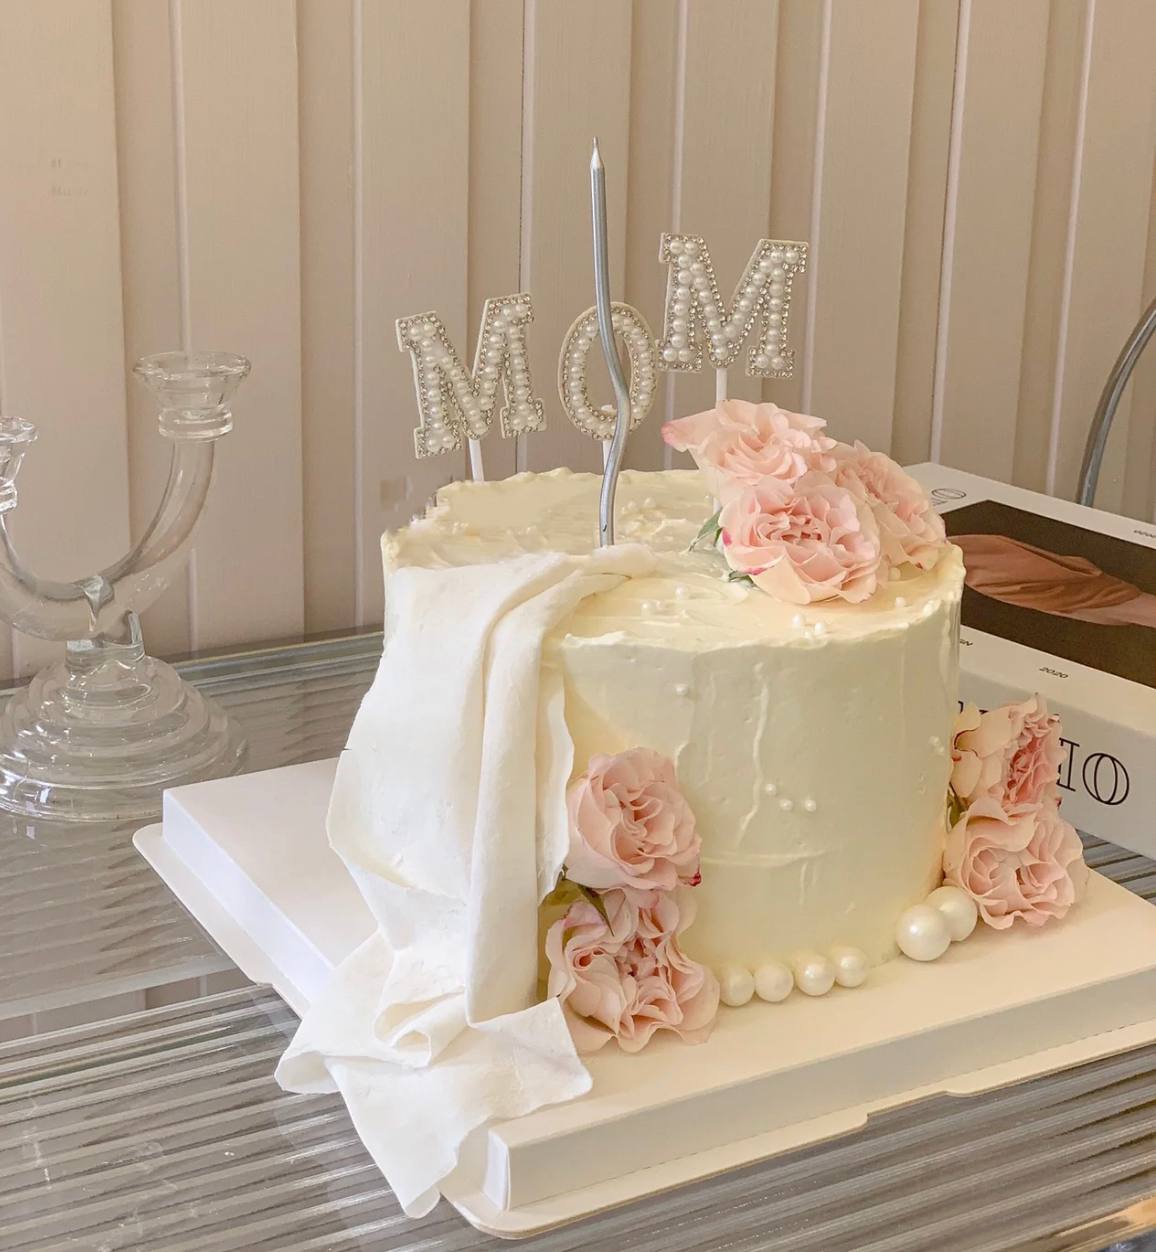 50 Best Mother's Day Cakes - Easy Cake Ideas for Mom